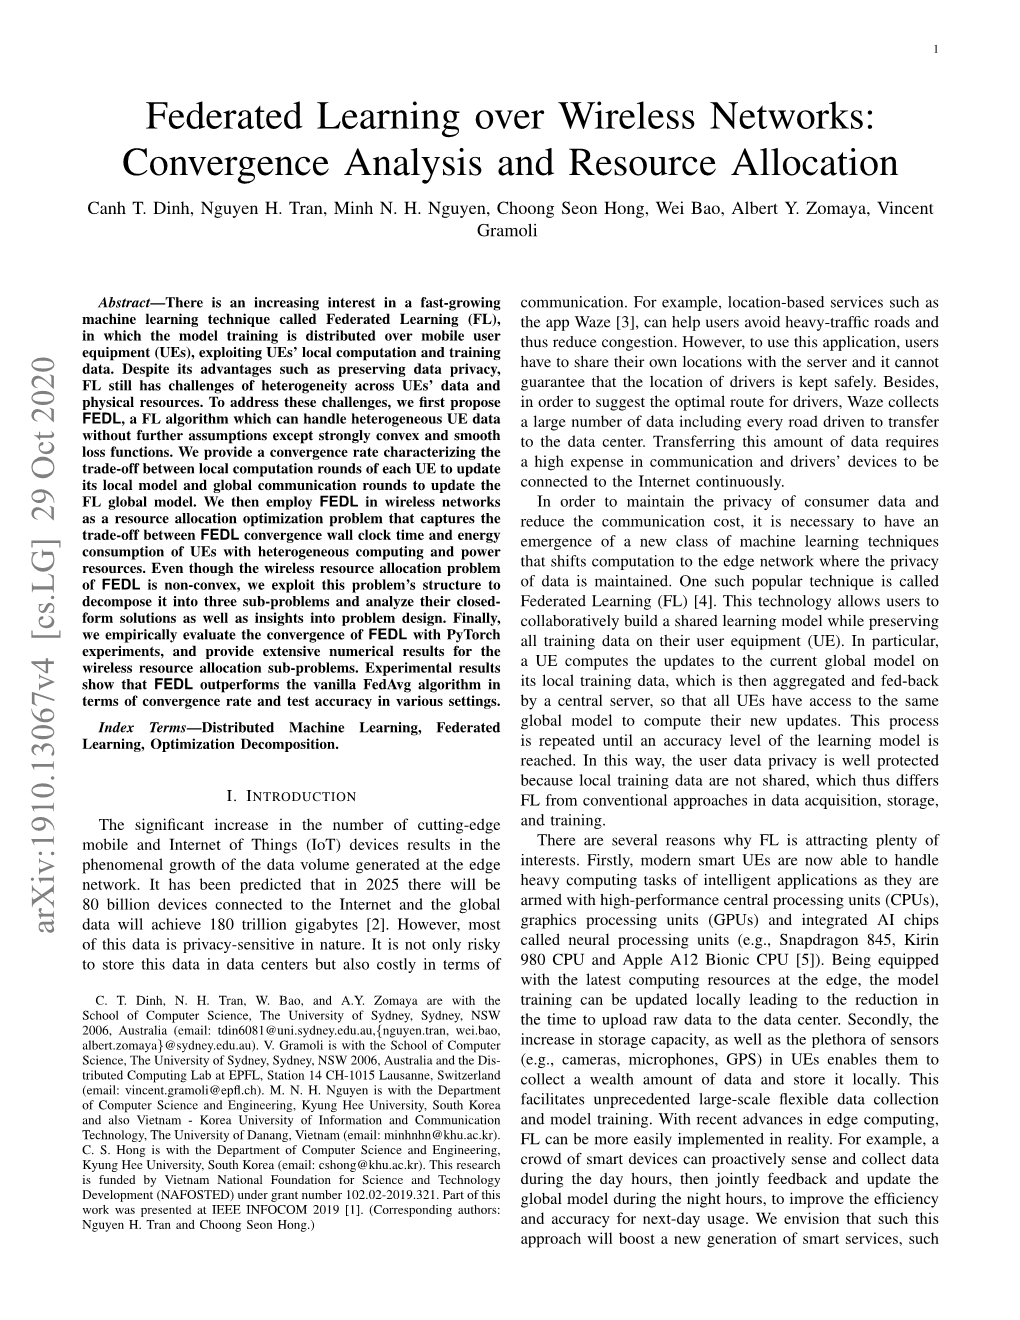 Federated Learning Over Wireless Networks: Convergence Analysis and Resource Allocation Canh T